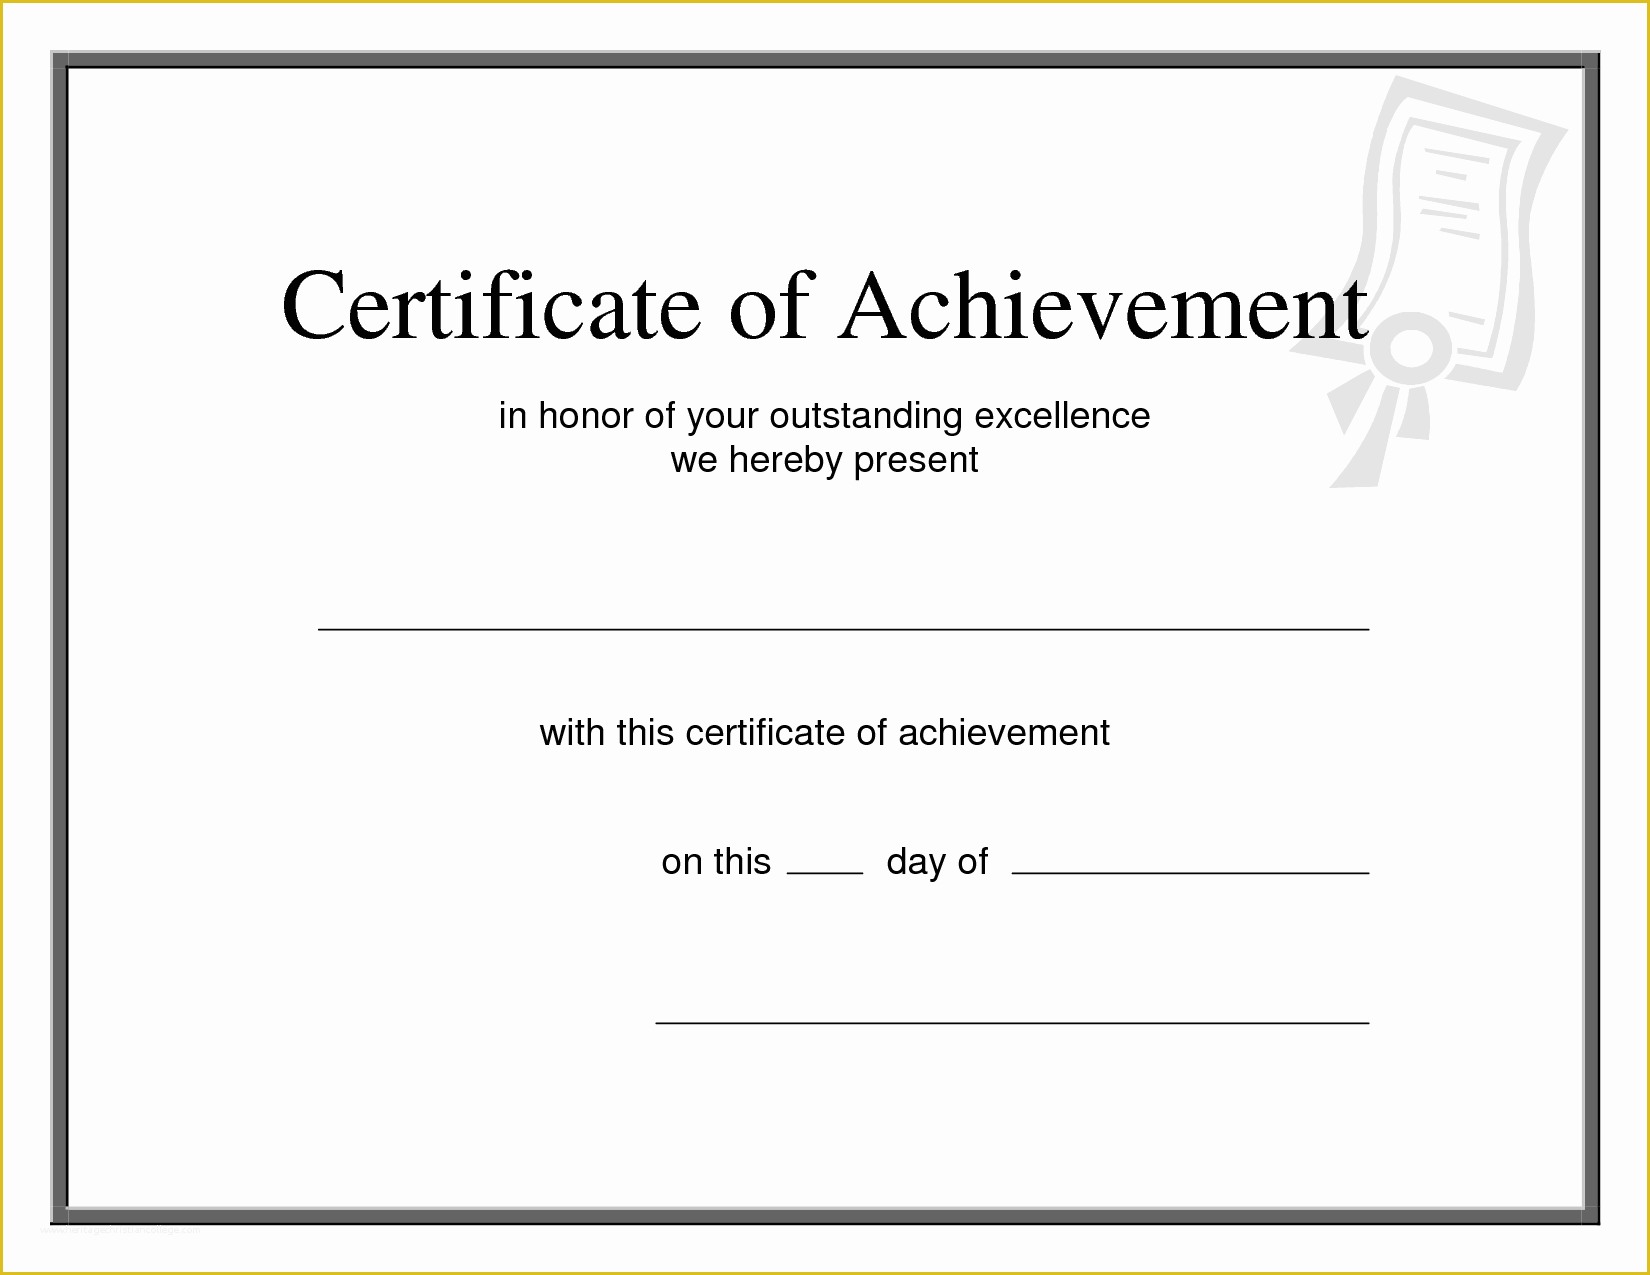 Certificate Of Achievement Template Free Of Army Certificate Achievement Template Example Mughals